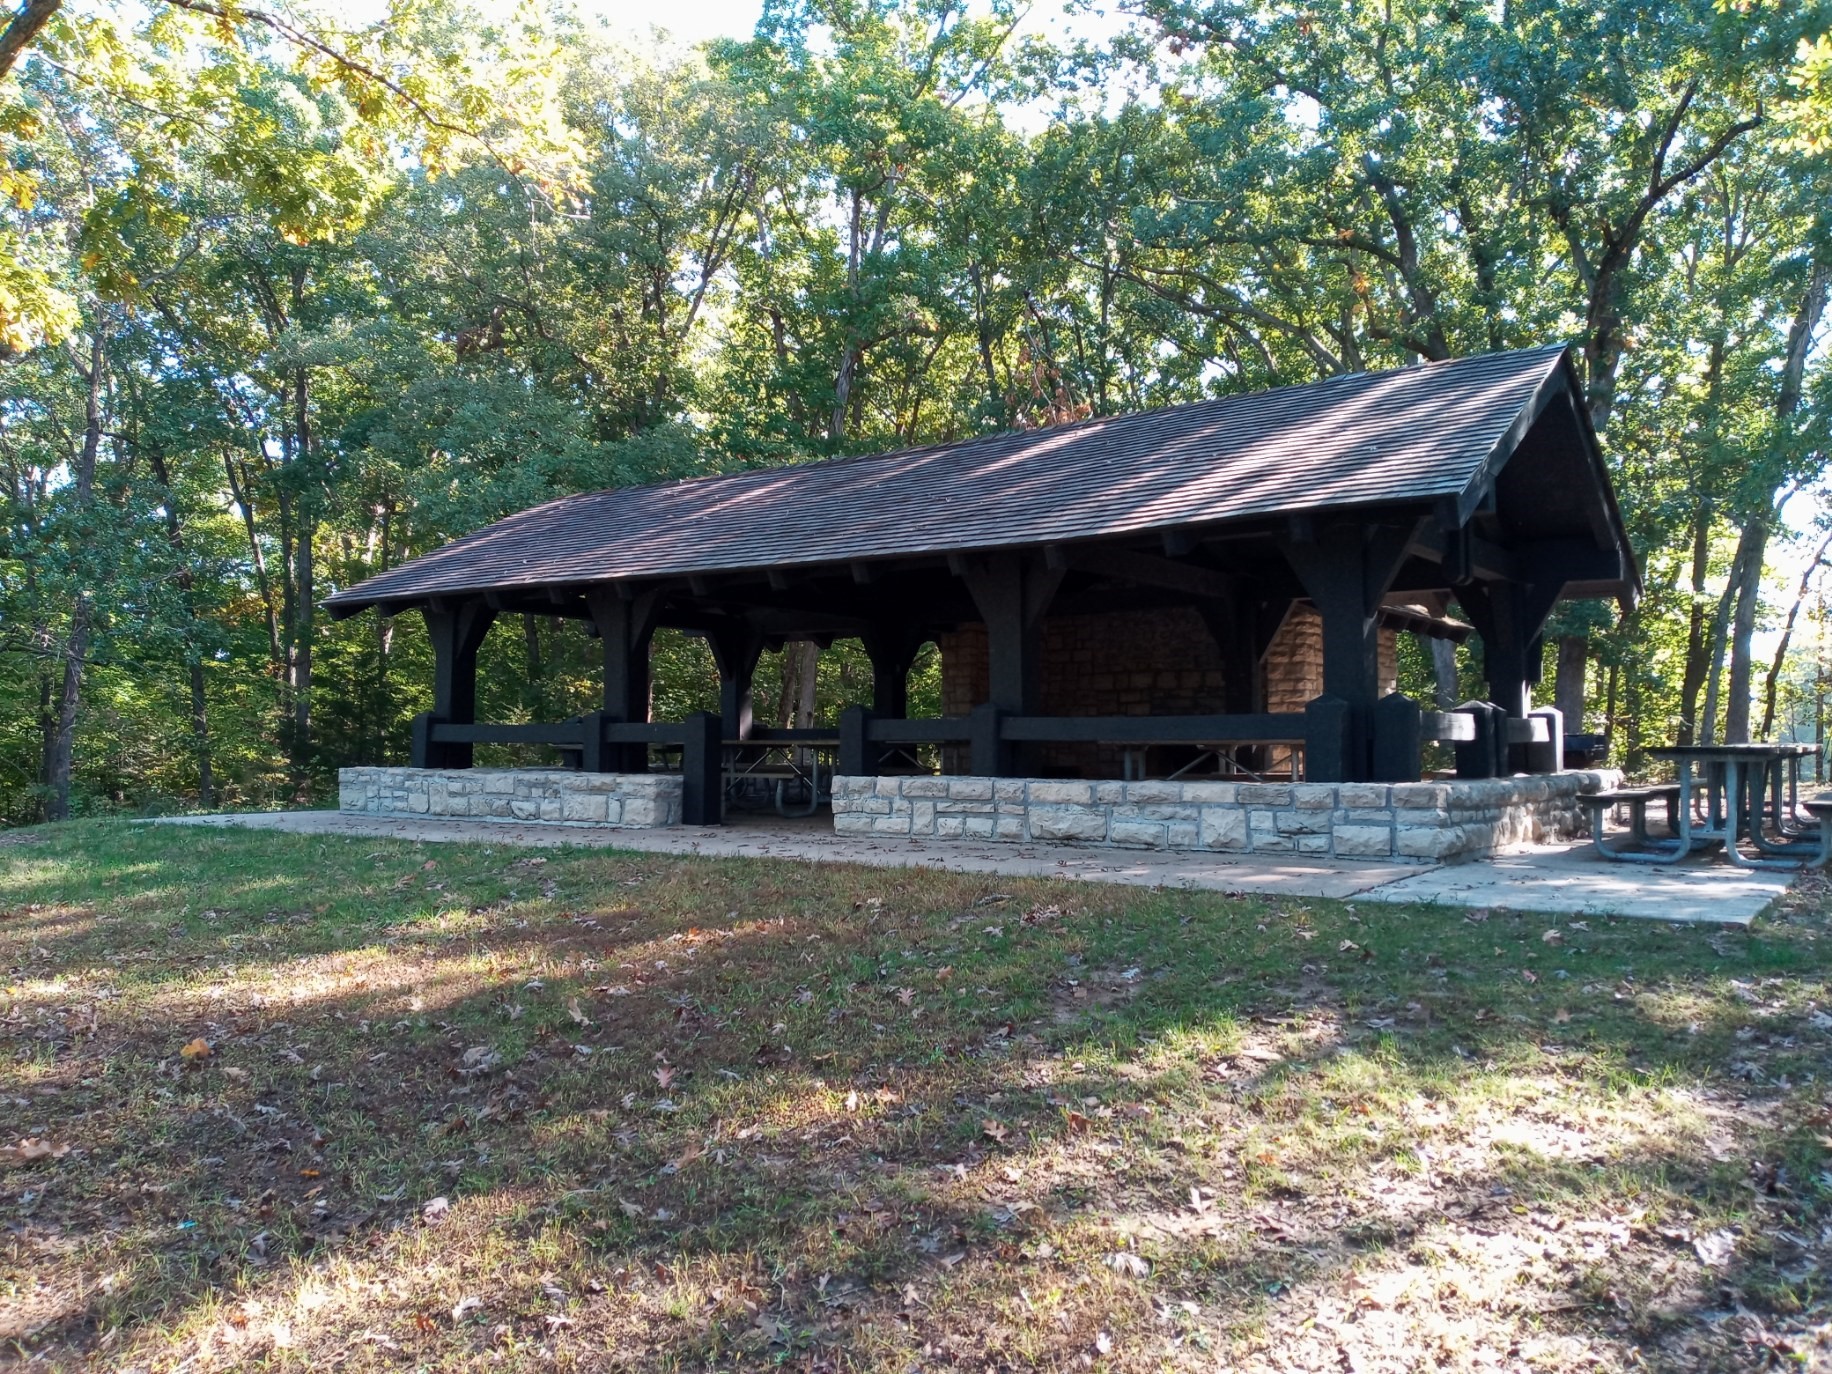 CCC open picnic shelter under trees